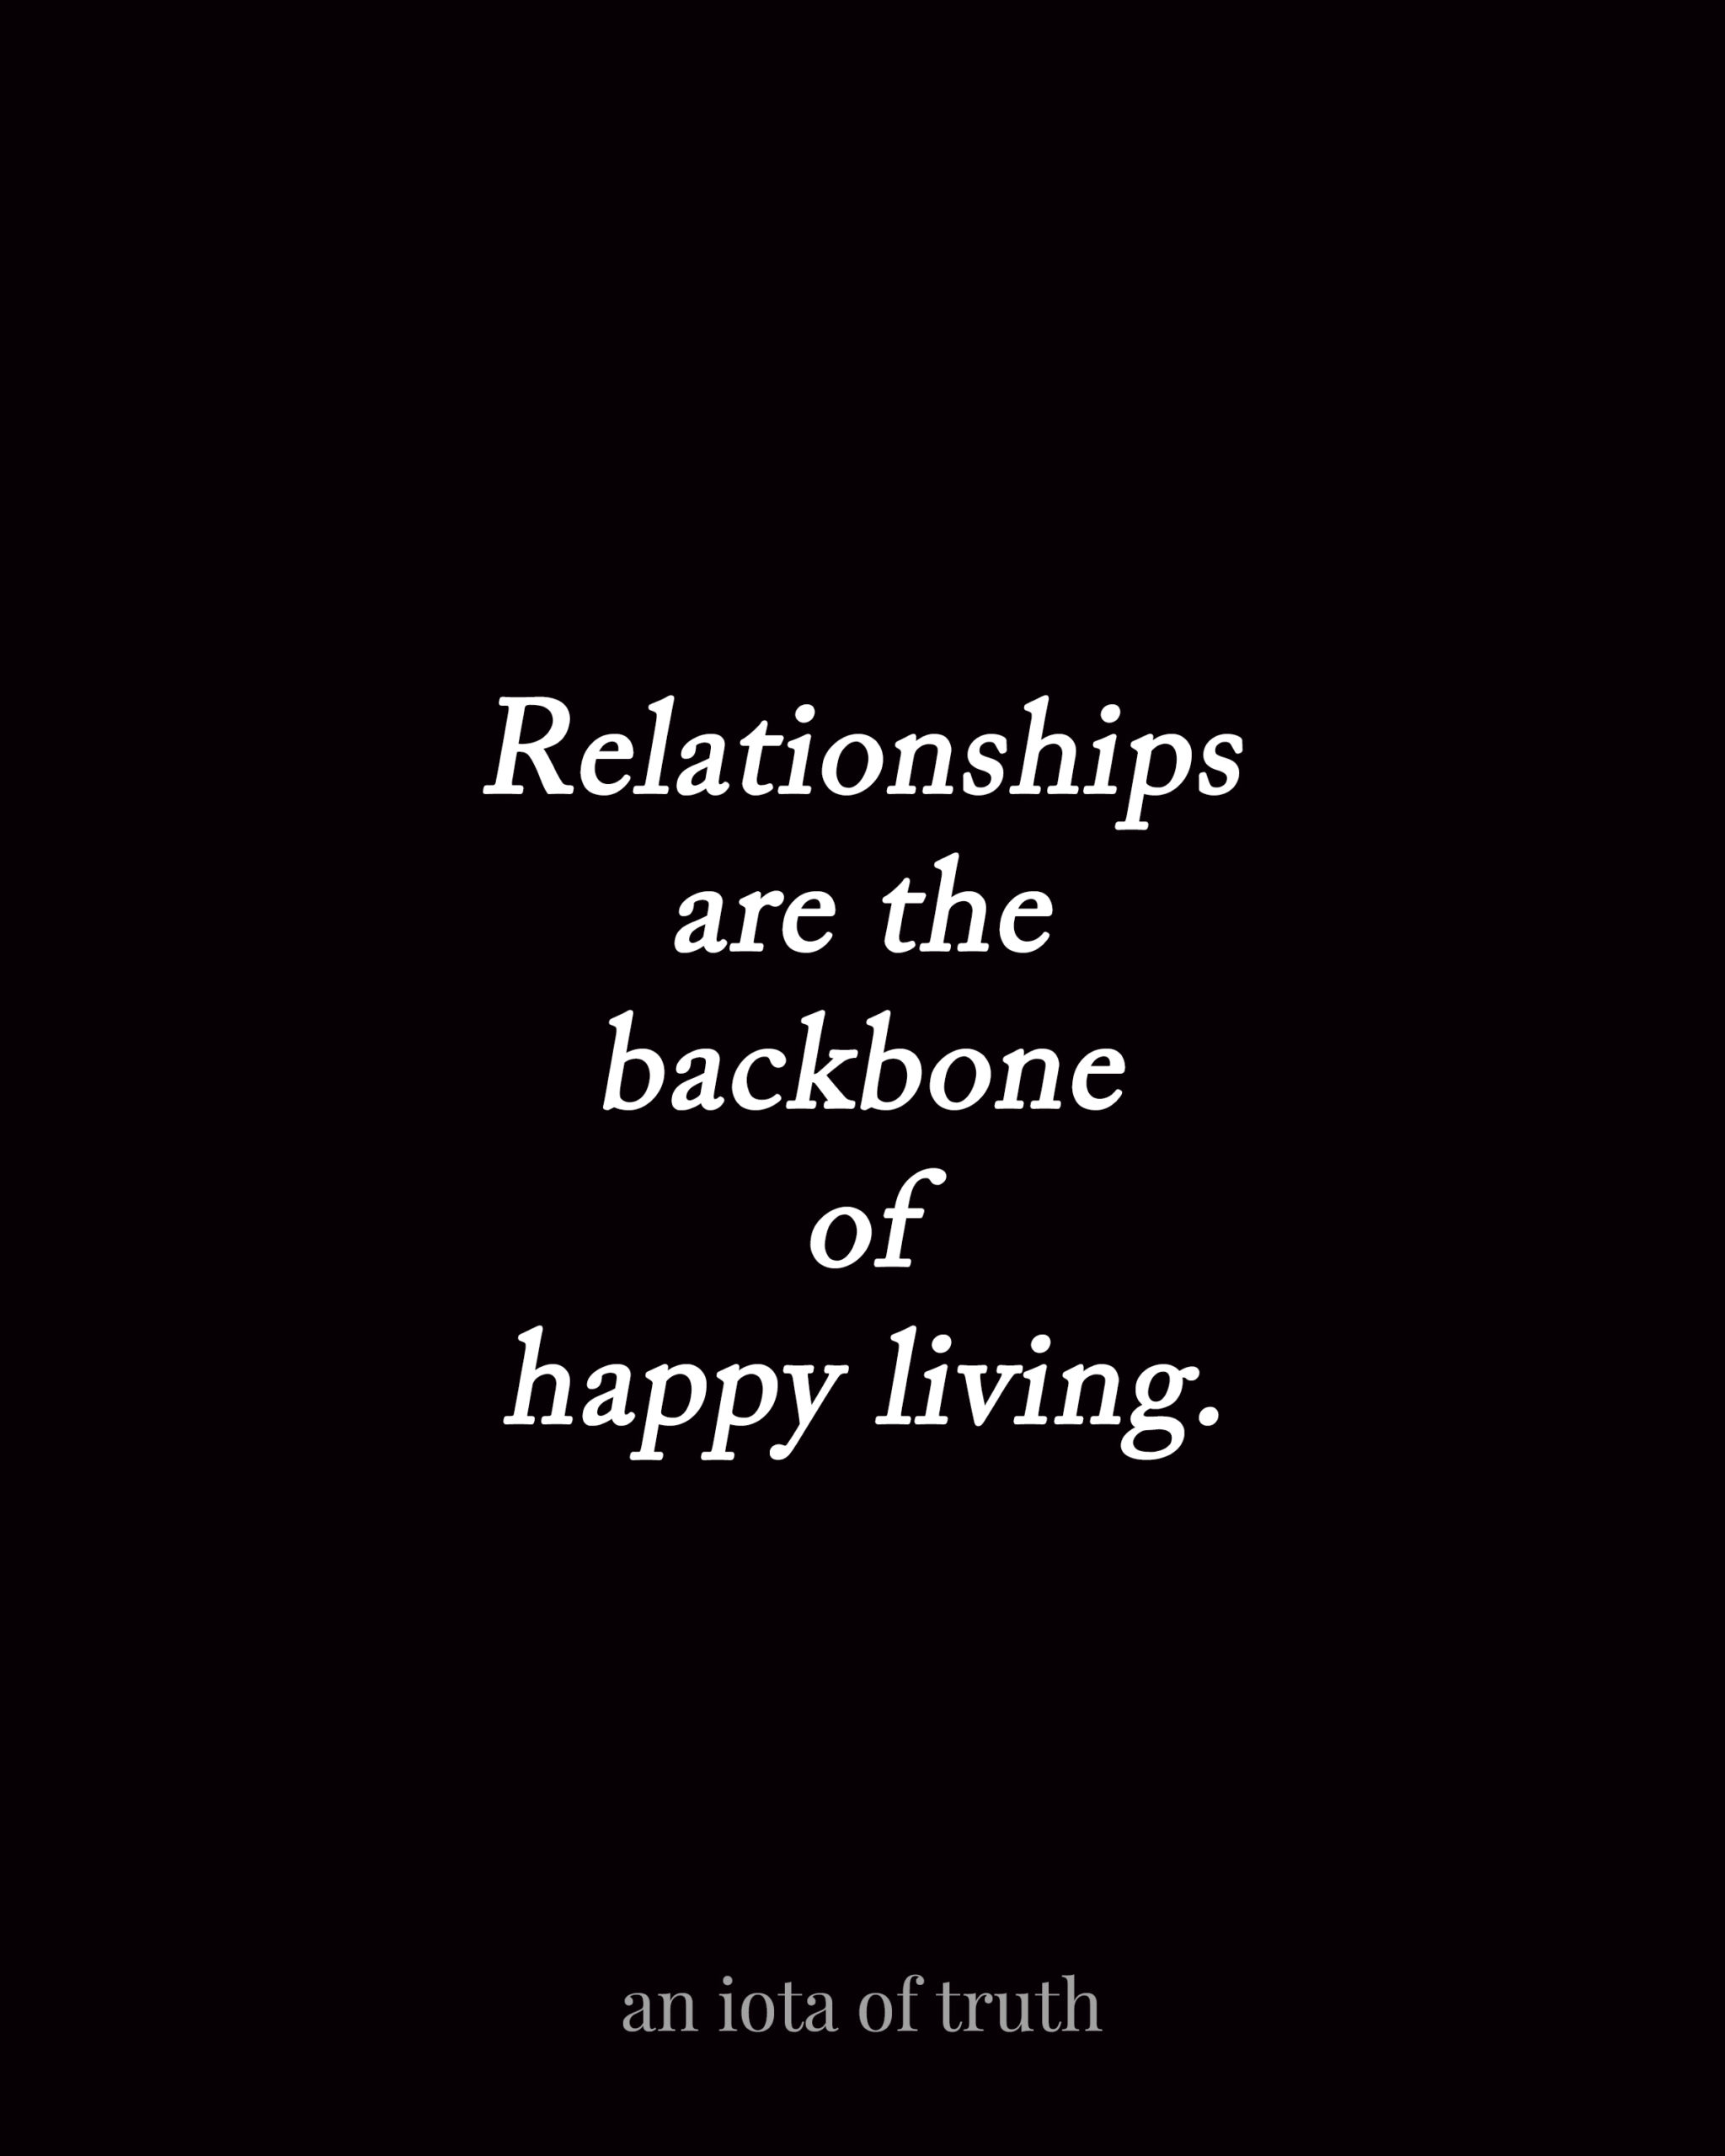 Relationships are the backbone of happy living.